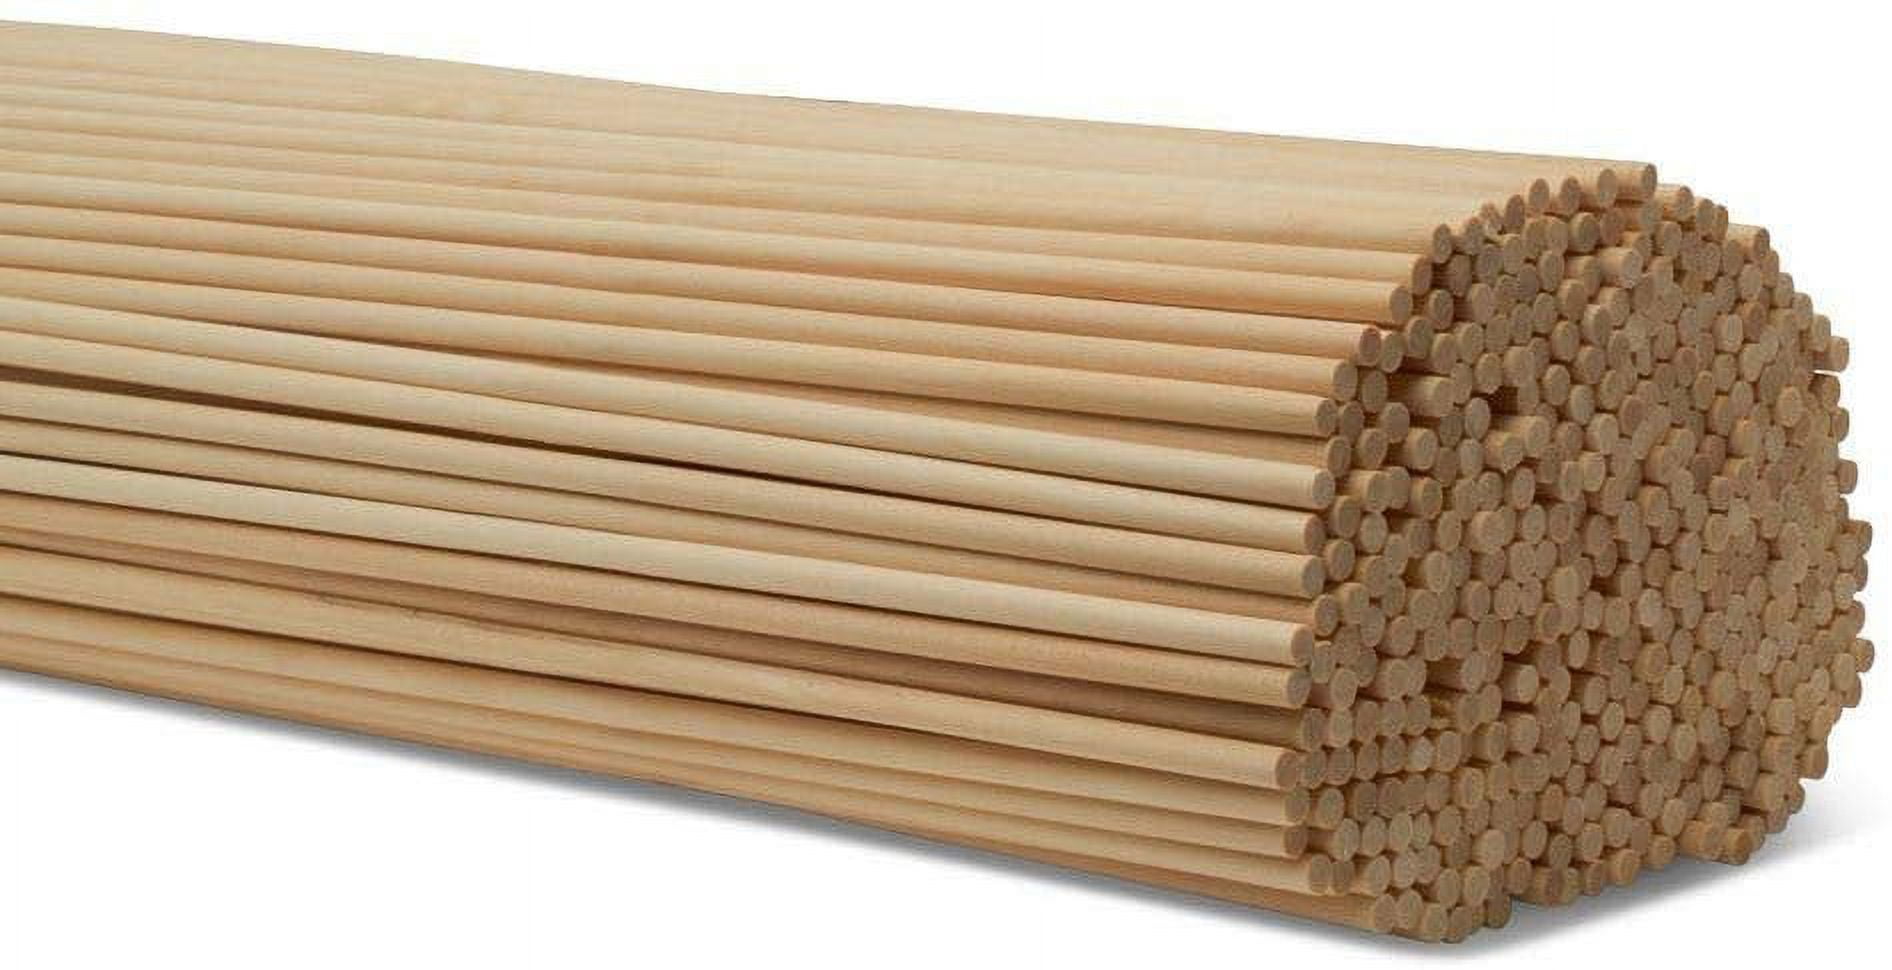  Dowel Rods Wood Sticks Wooden Dowel Rods - 1 x 24 Inch  Unfinished Hardwood Sticks - for Crafts and DIYers - 10 Pieces by  Woodpeckers